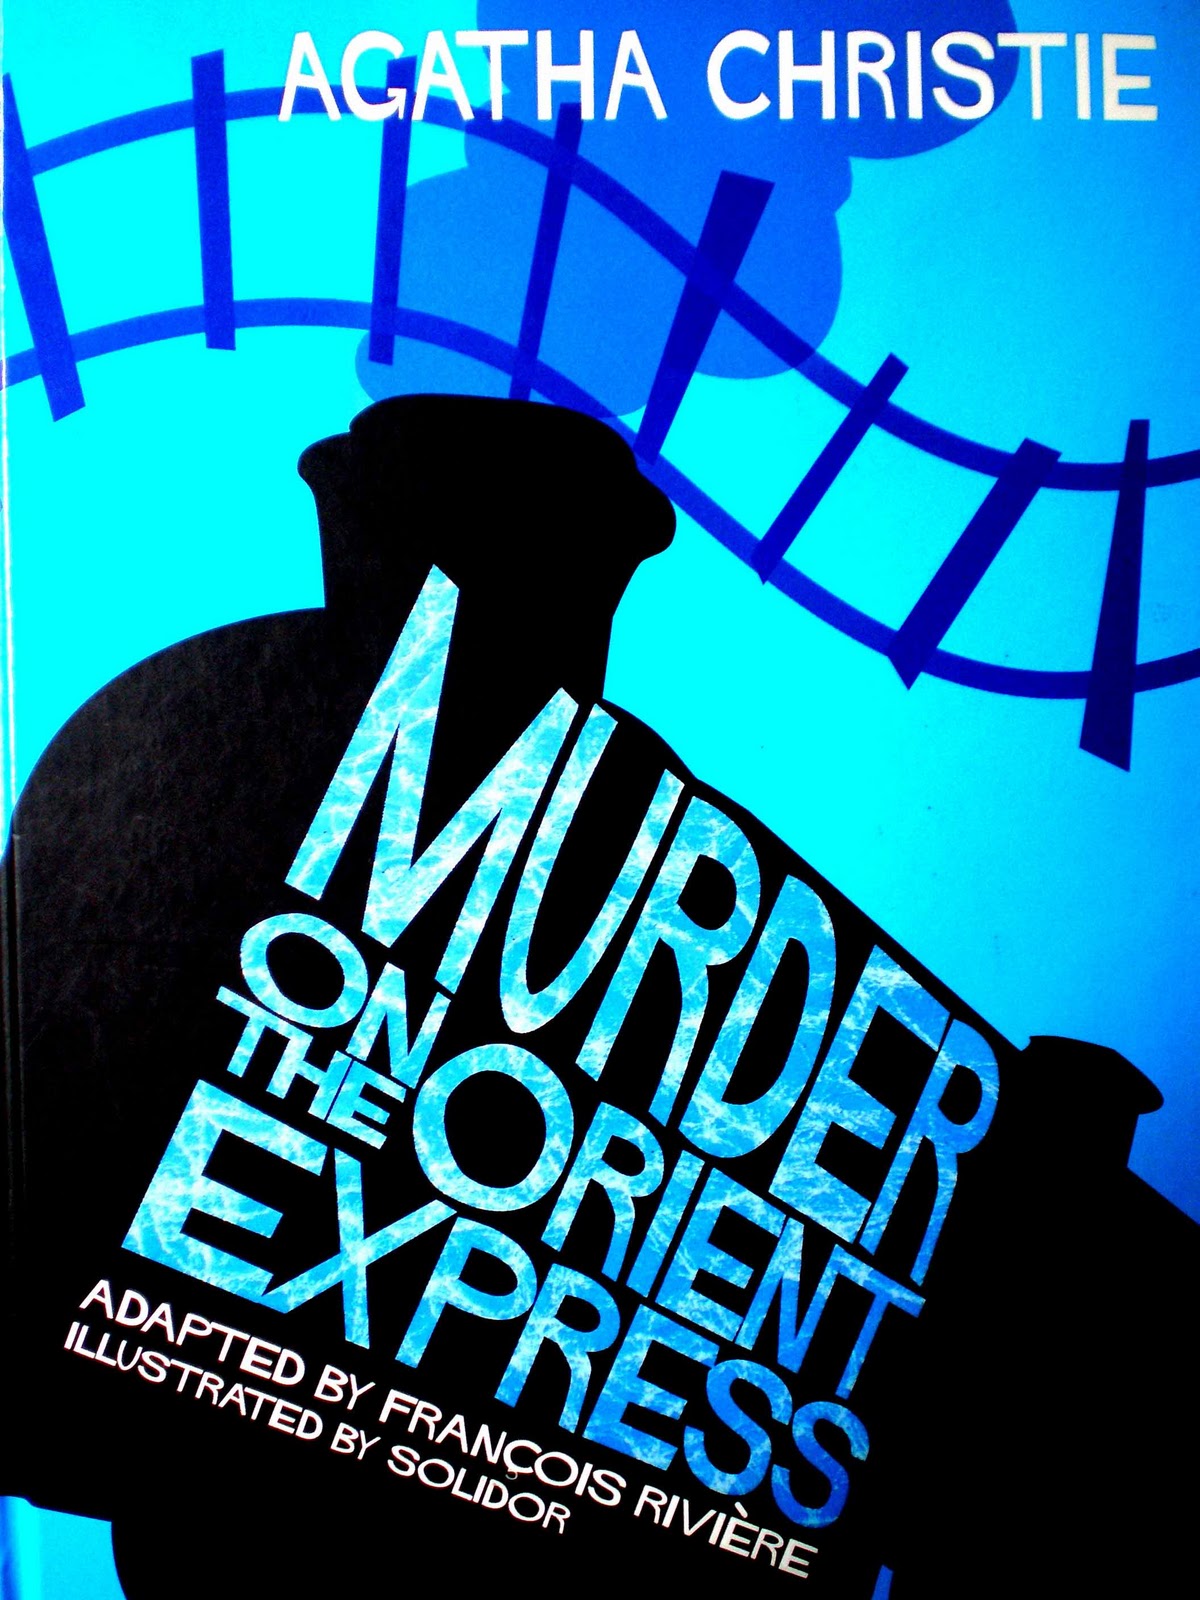 [RIVIÈRE AND SOLIDOR - MURDER ON THE ORIENT EXPRESS.jpg]